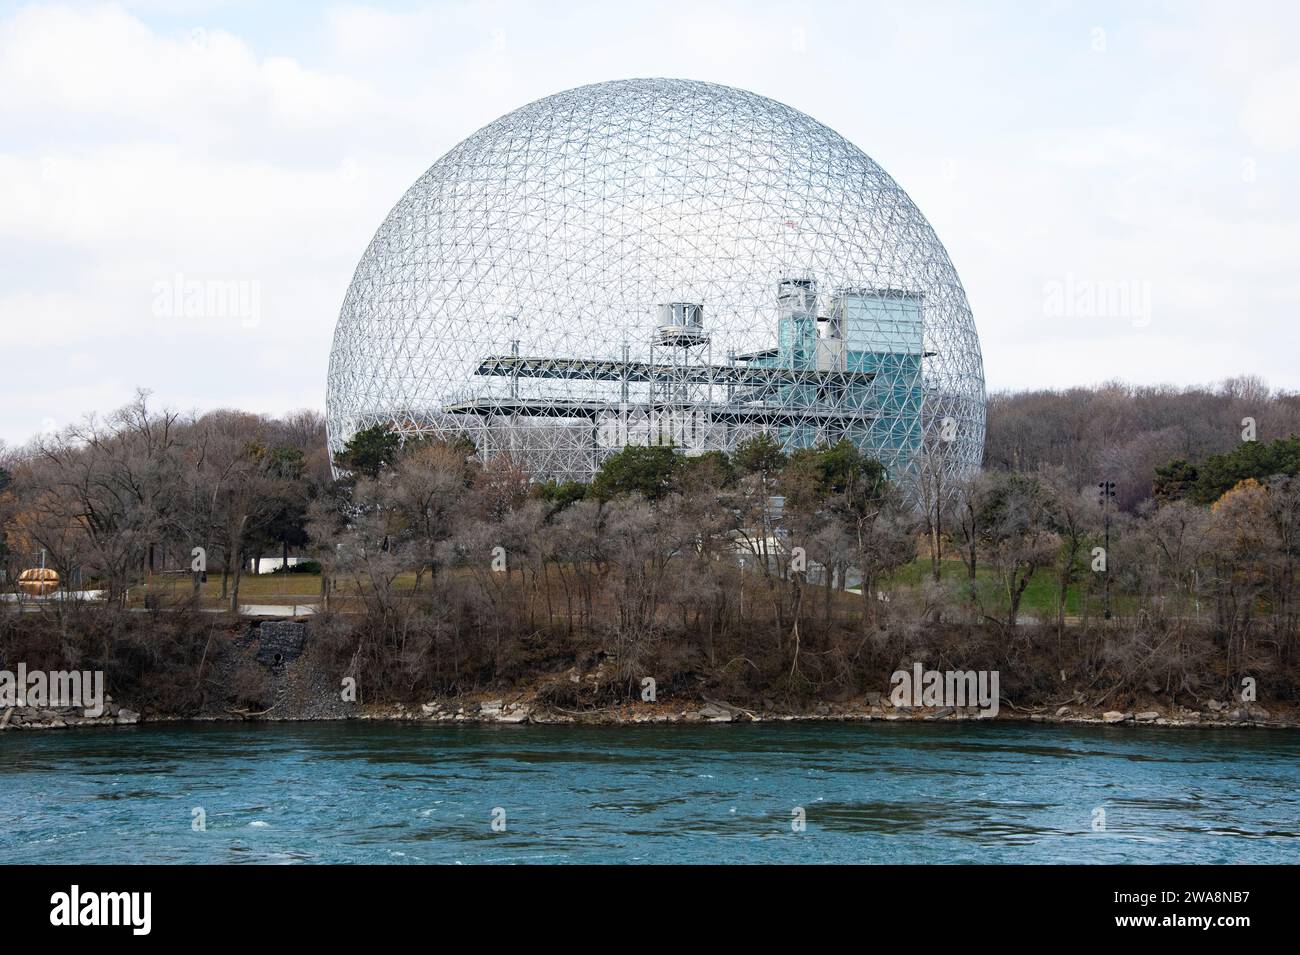 The Biosphere Environment Museum from Notre-Dame Island in Montreal, Quebec, Canada Stock Photo